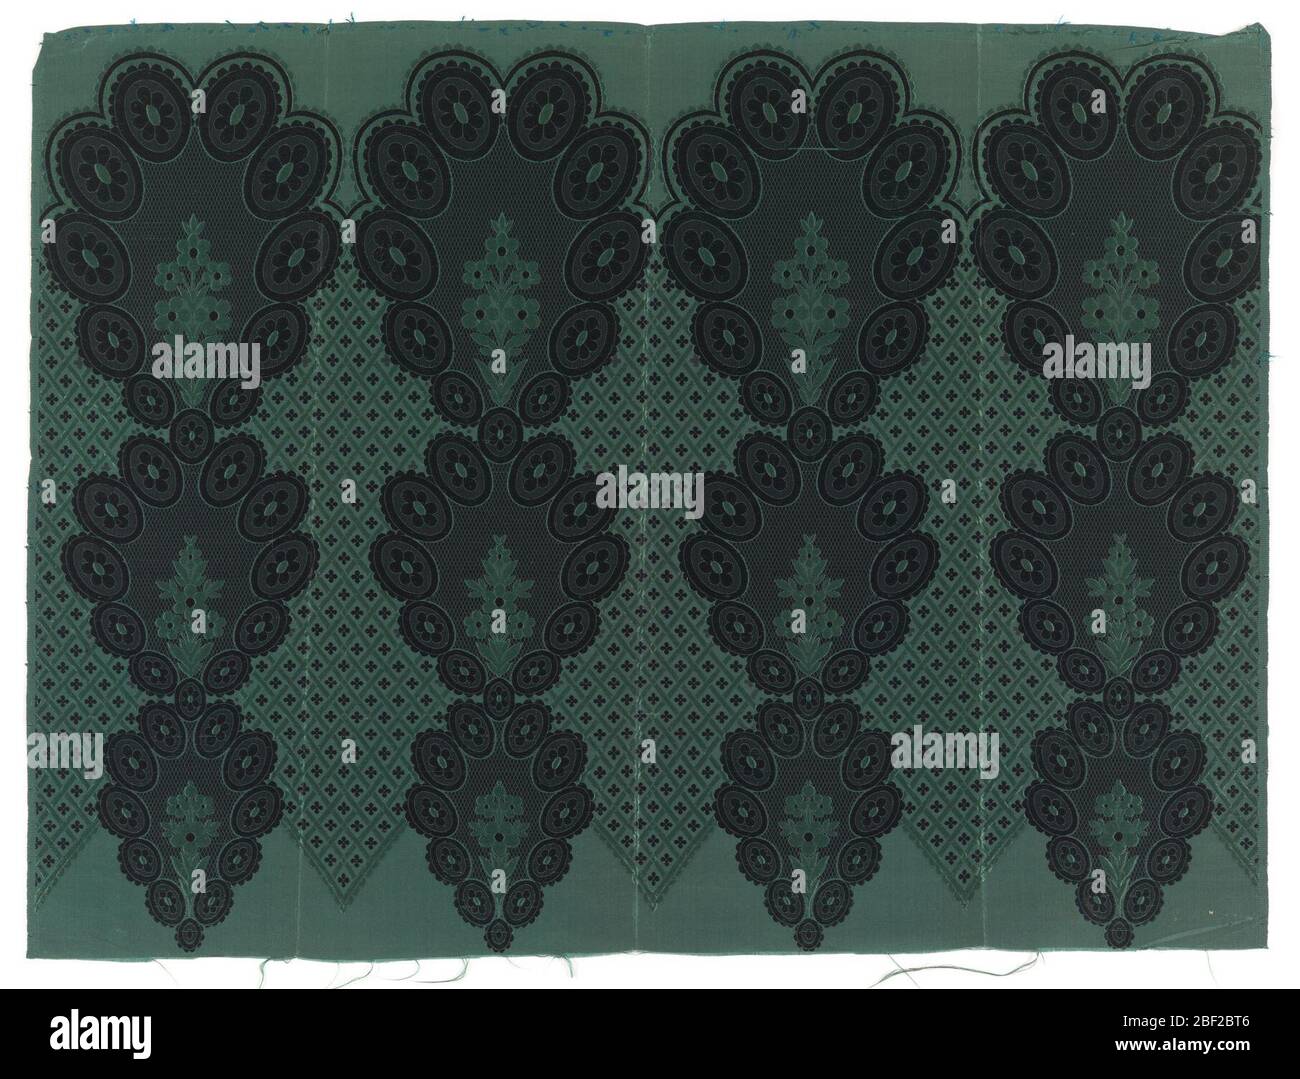 Textile. Silk border or flounce printed with lace-like floral and diaper pattern with black rosettes against a grey ground. One green warp; two wefts, black and green,both used for patterning. Stock Photo